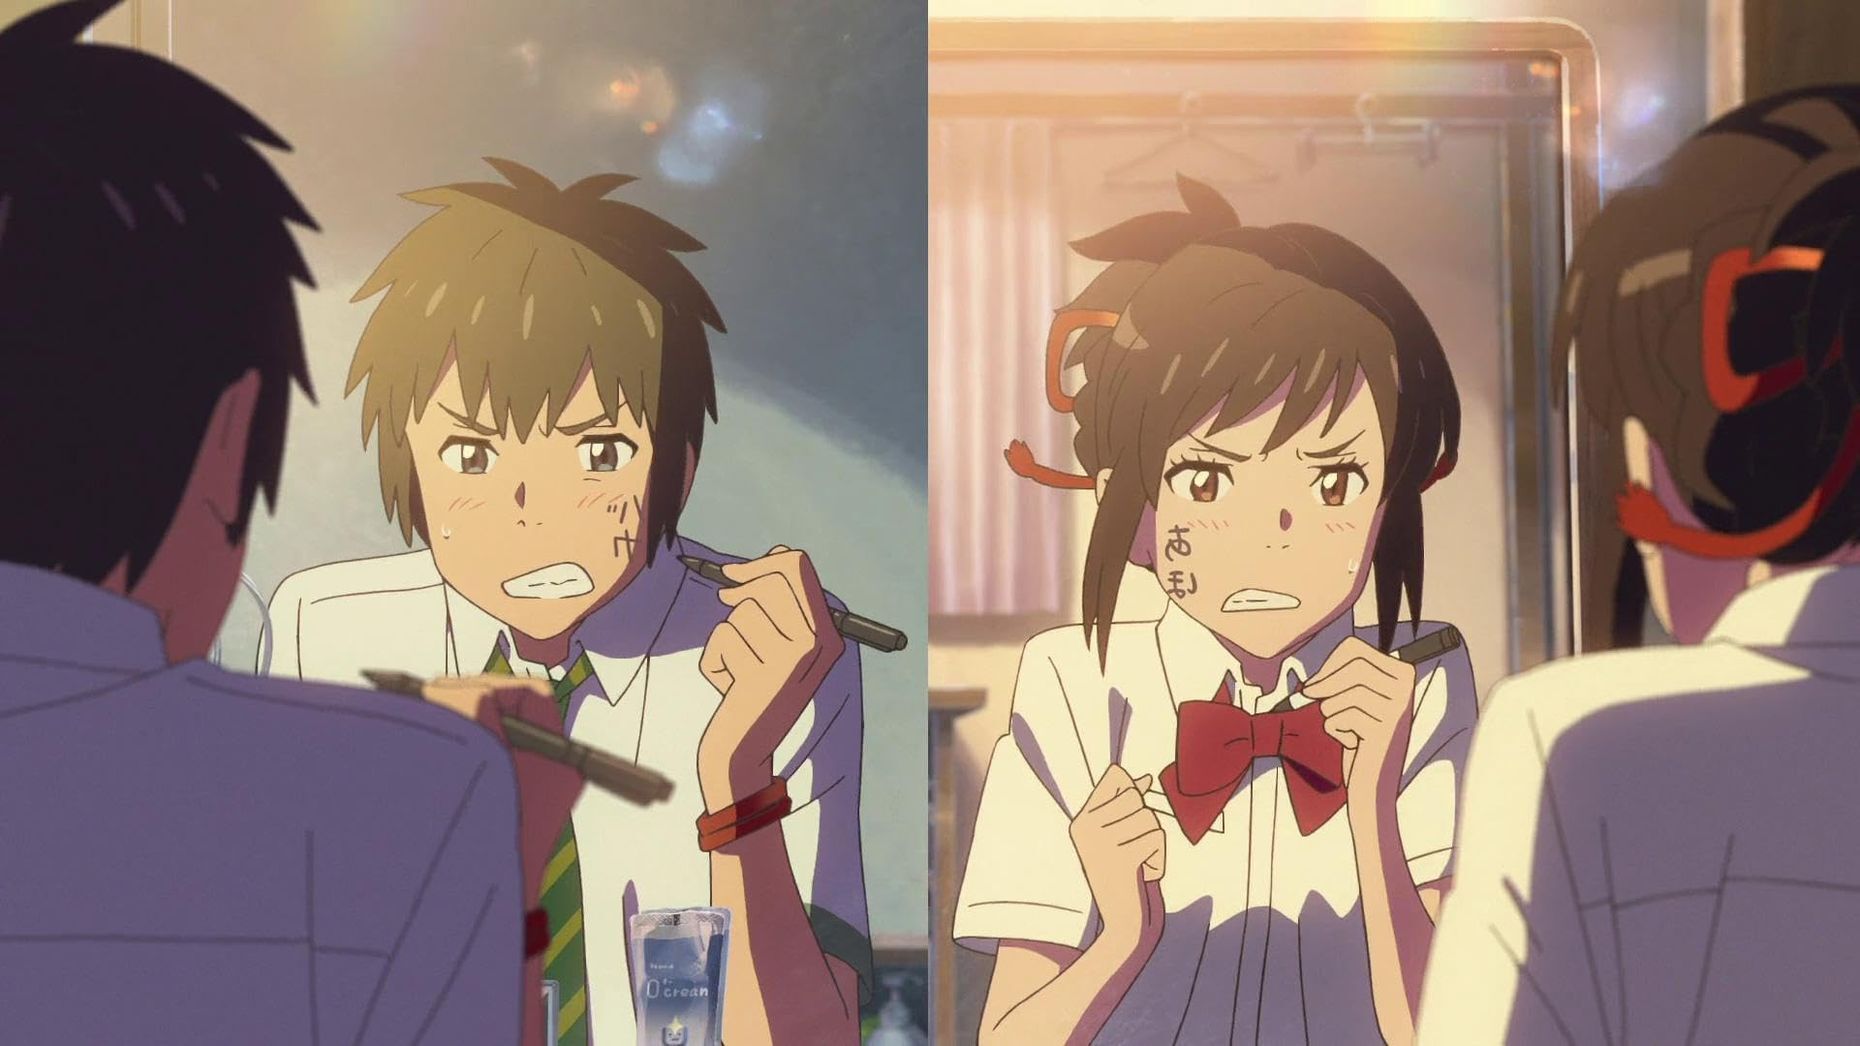 <p>This sweet, animated romantic fantasy follows two teenagers—a boy in Tokyo and a girl in a remote mountain town—who discover that they’re inadvertently swapping bodies. As the film unspools, the pair develop a profound connection across space and time. Directed by Makoto Shinkai, also credited as the writer and storyboard artist, <em>Your Name</em> became the <a href="https://ourculturemag.com/2017/09/02/review-name-kimi-no-na-wa-2016/">highest-grossing Japanese animated film</a> to date, beating Hayao Miyazaki’s <em>Spirited Away</em>!</p>